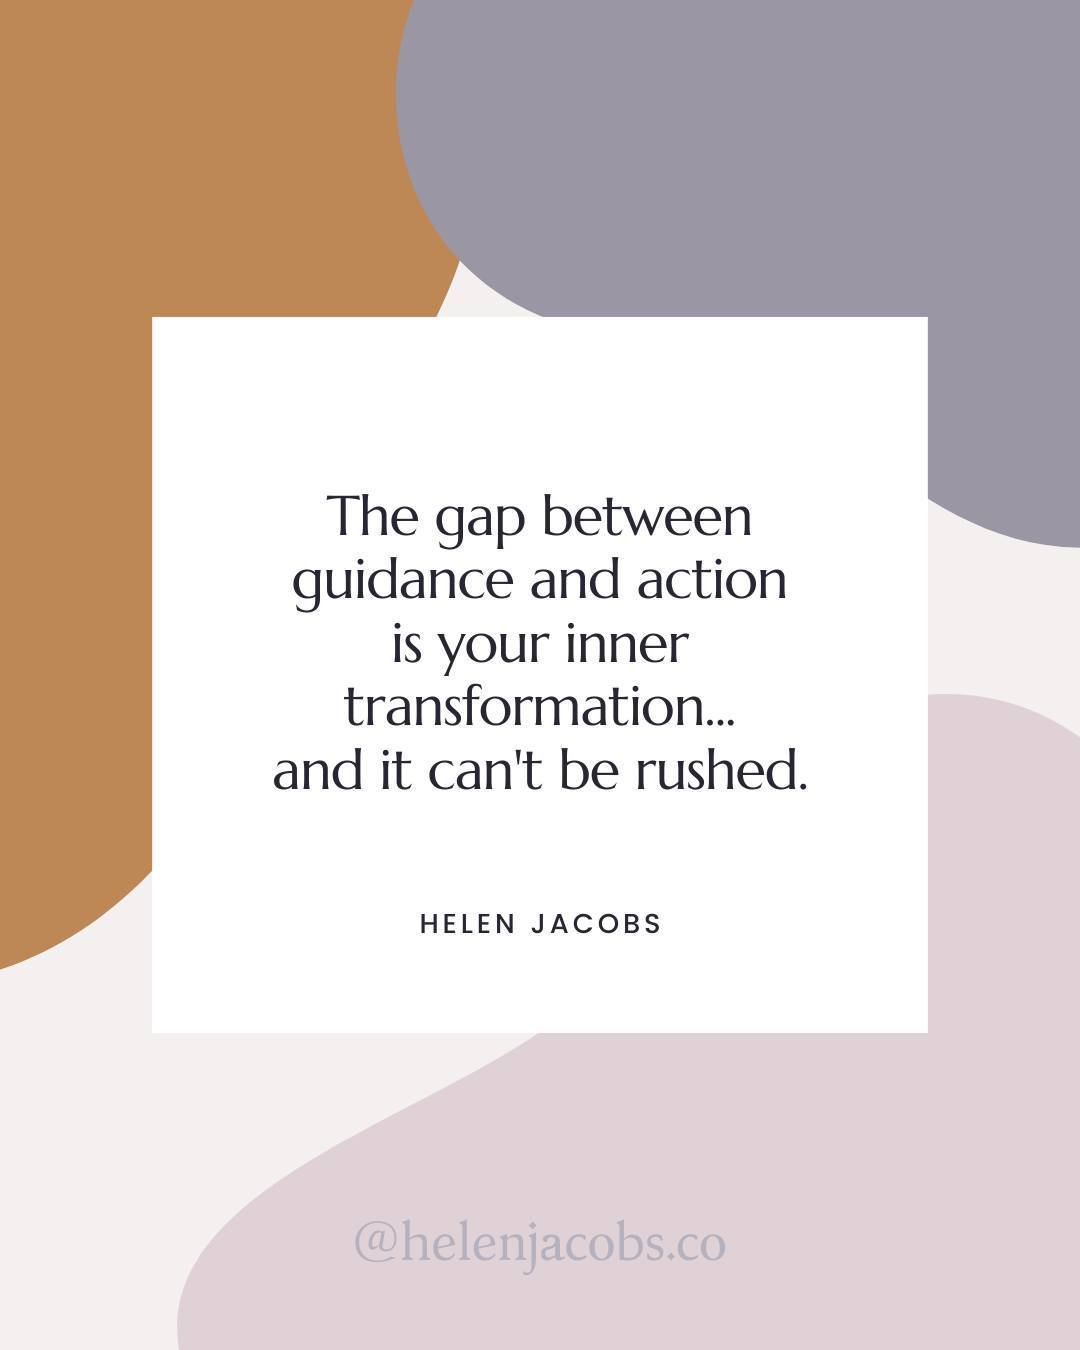 This quote has been taking up space all week, since I first shared it on Instagram... ⁠
⁠
What do you think? Is that your gap between guidance and action?